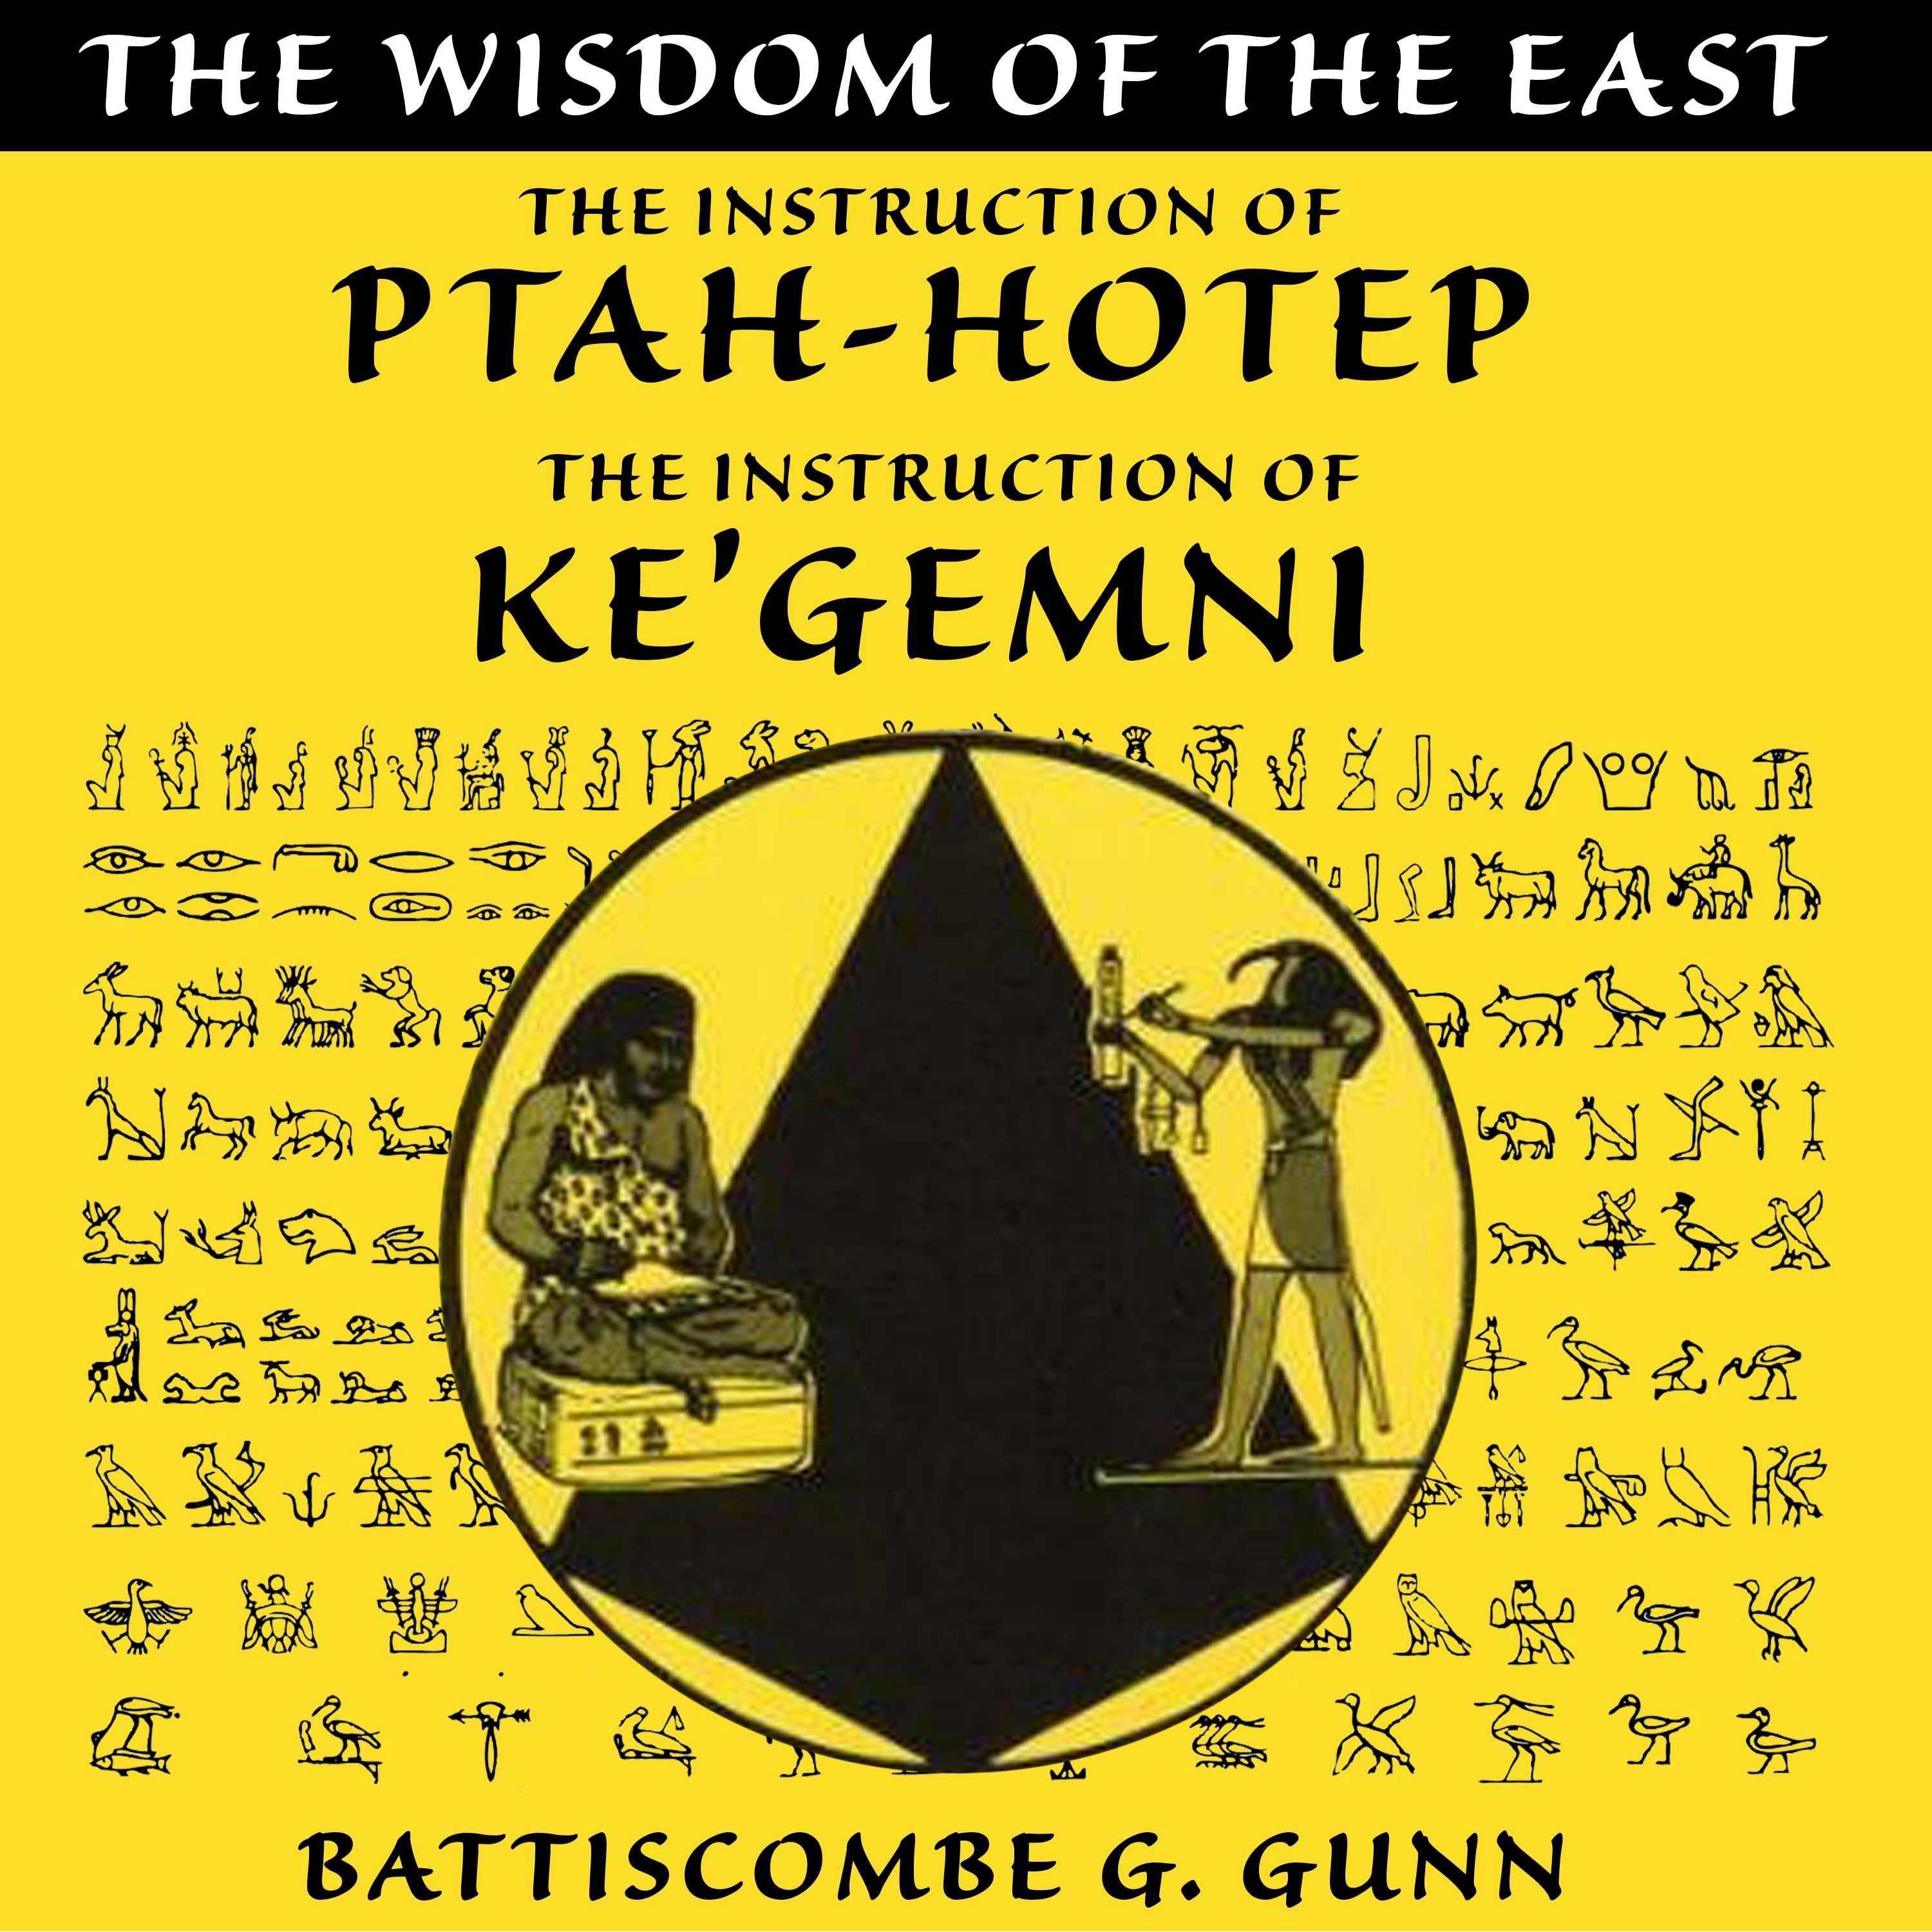 The Wisdom of the East: The Instruction of Ptah-hotep and The Instruction of Ke'gemni - Battiscombe G. Gunn